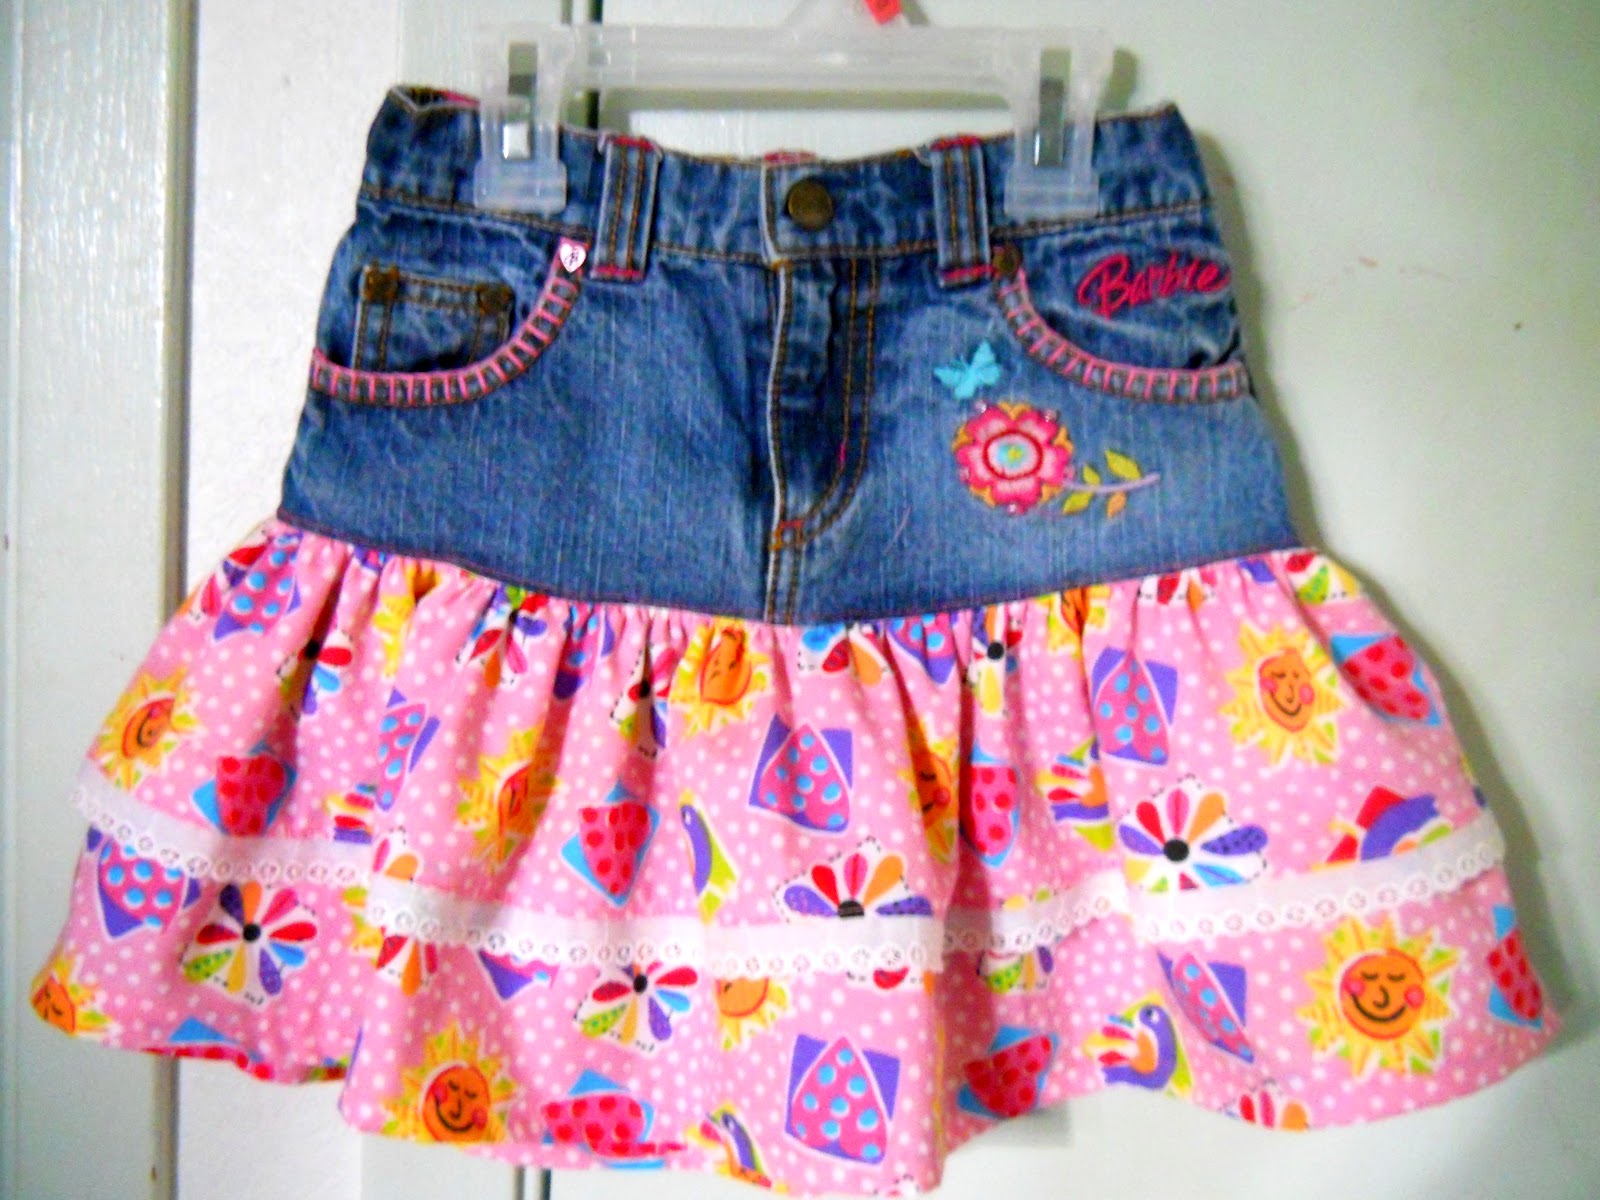 Sew With Aloha: Welcome and a Refashioned Skirt